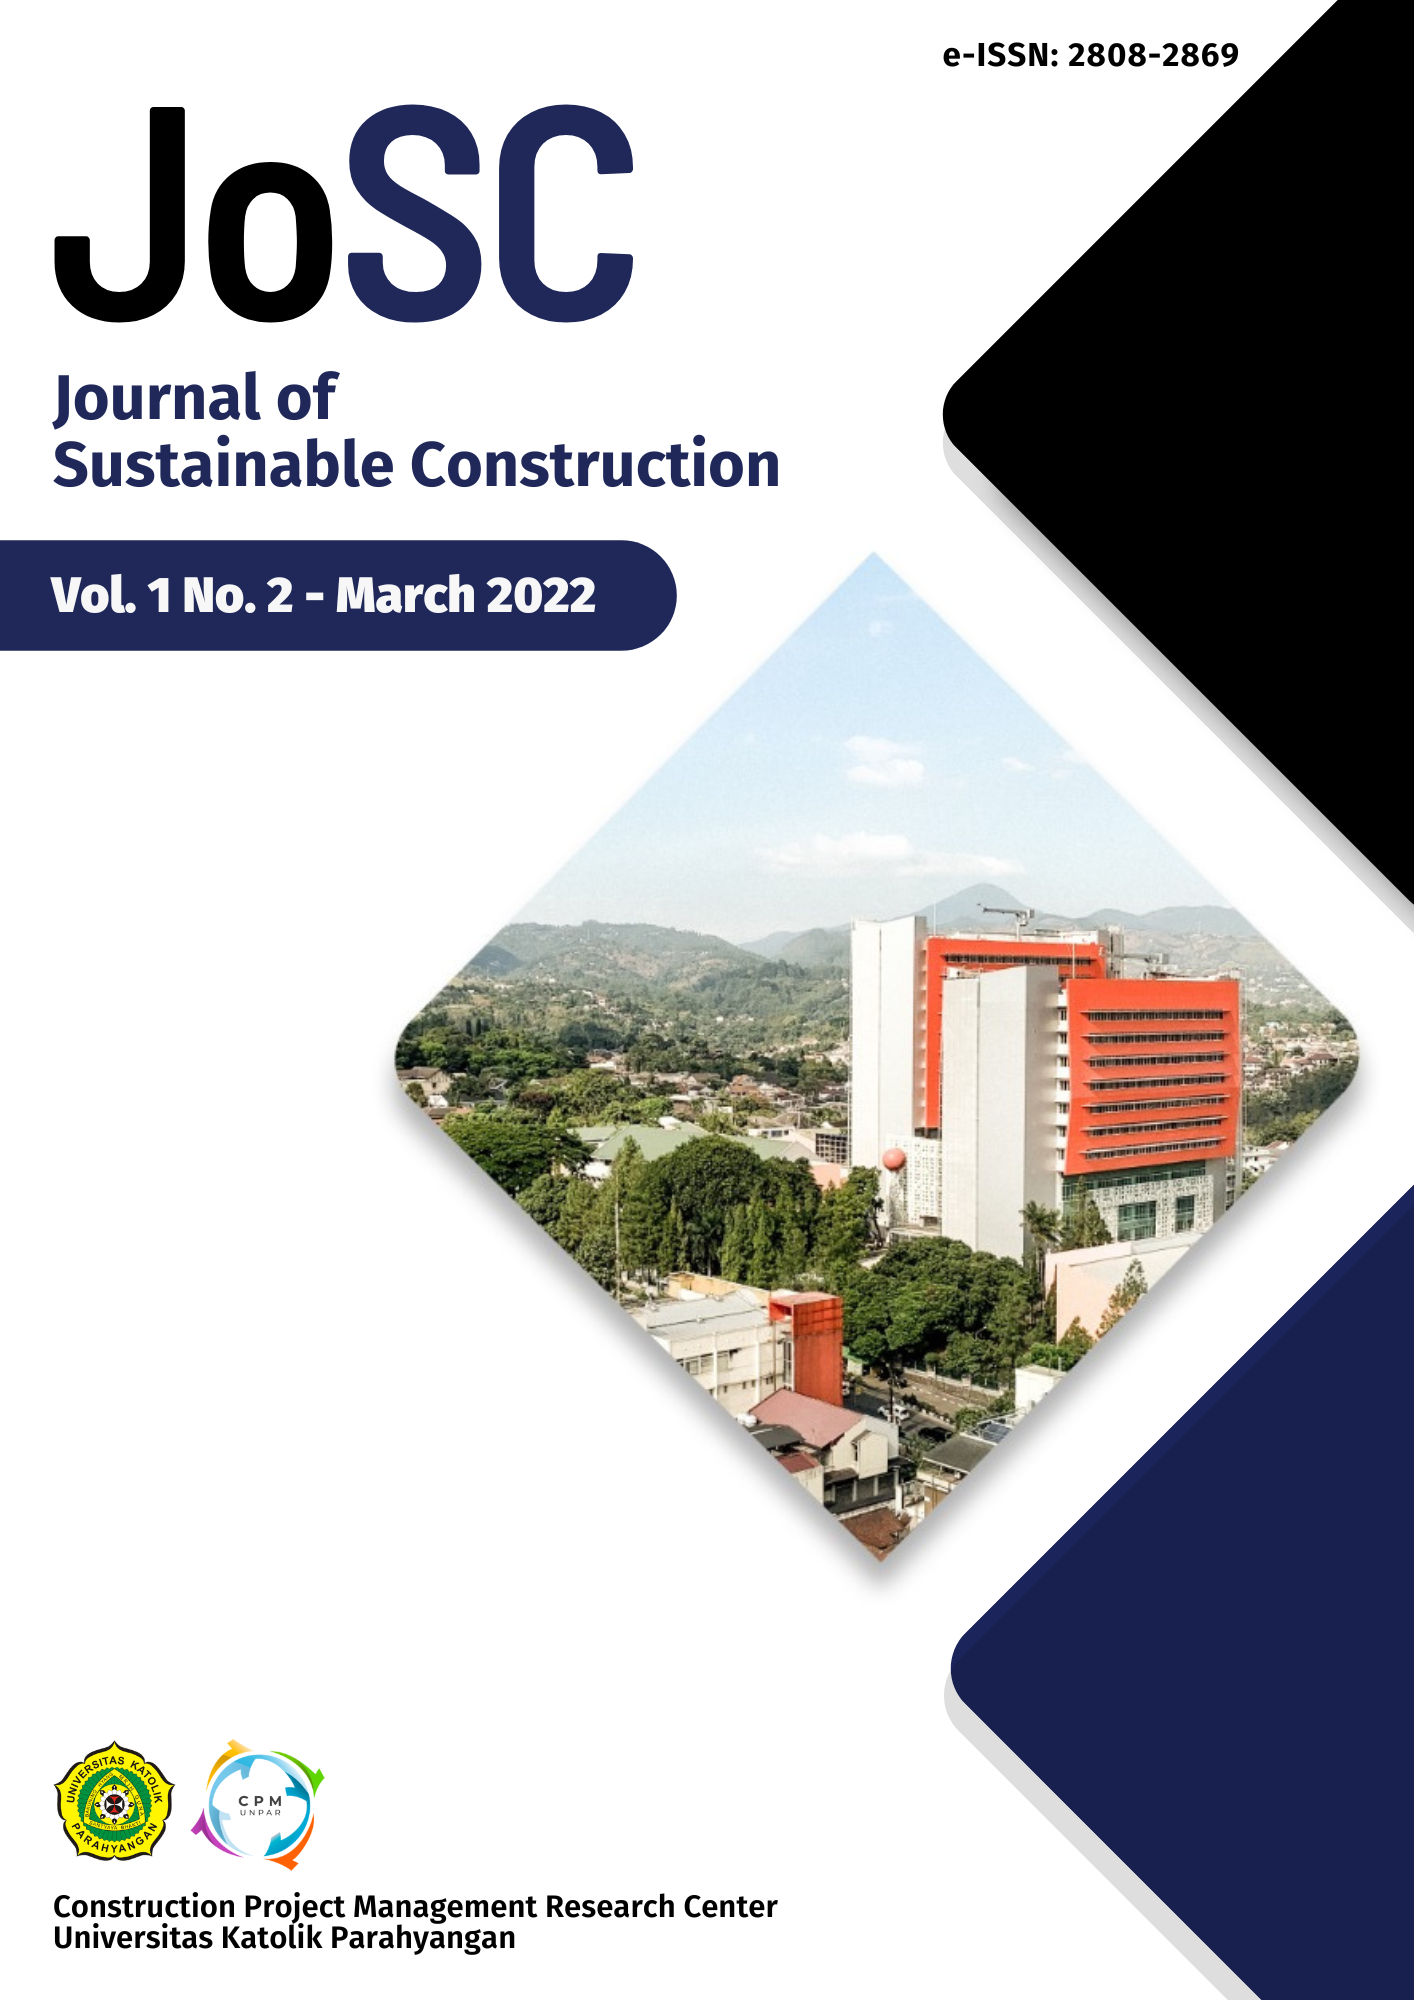 					View Vol. 1 No. 2 (2022): Journal of Sustainable Construction
				